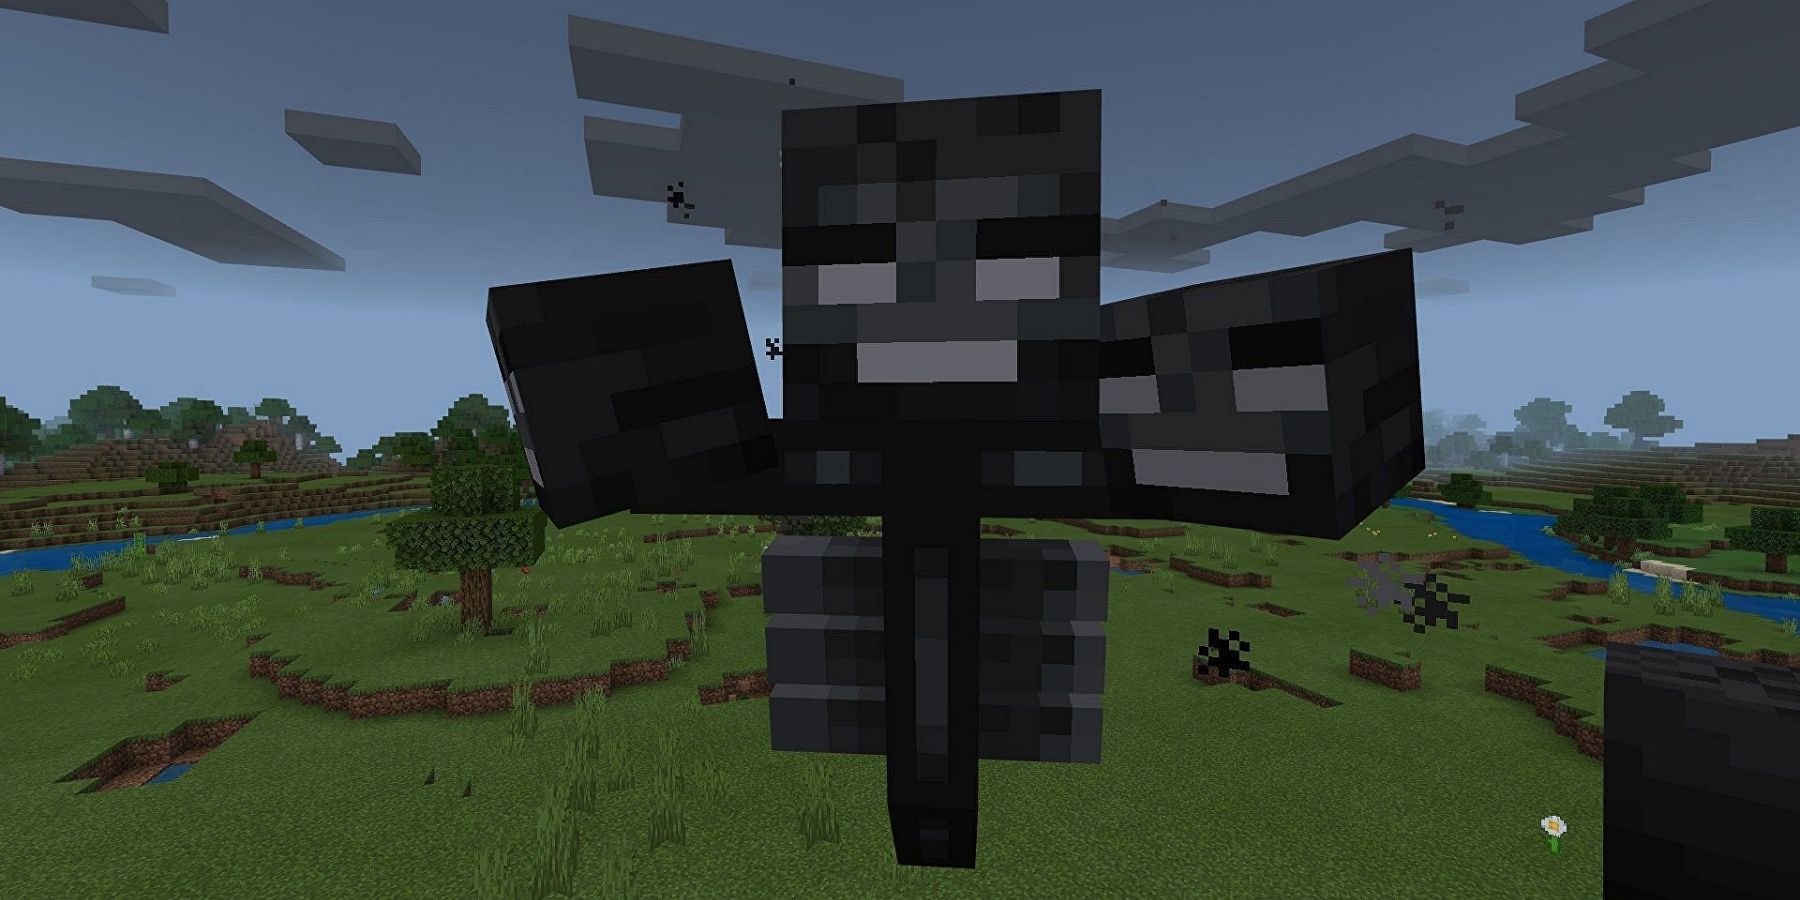 This Minecraft mod turns mobs into Lego figures